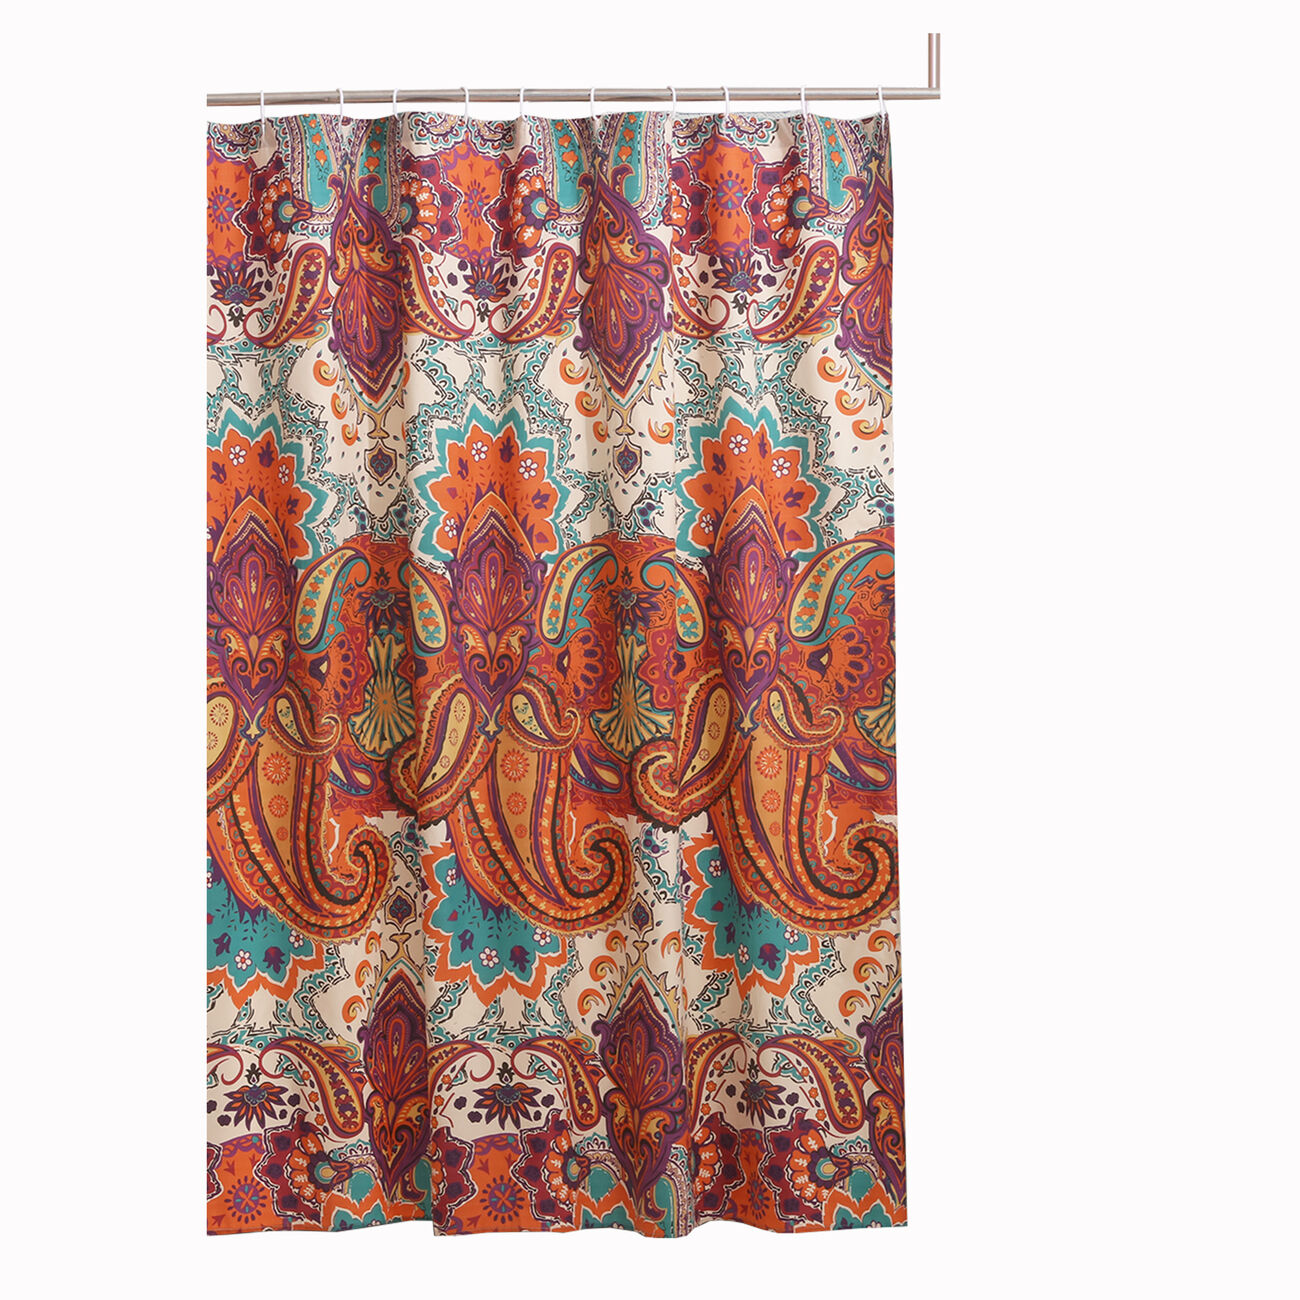 72 x 72 Polyester Shower Curtain with Bohemian Design, Multicolor - BM223395